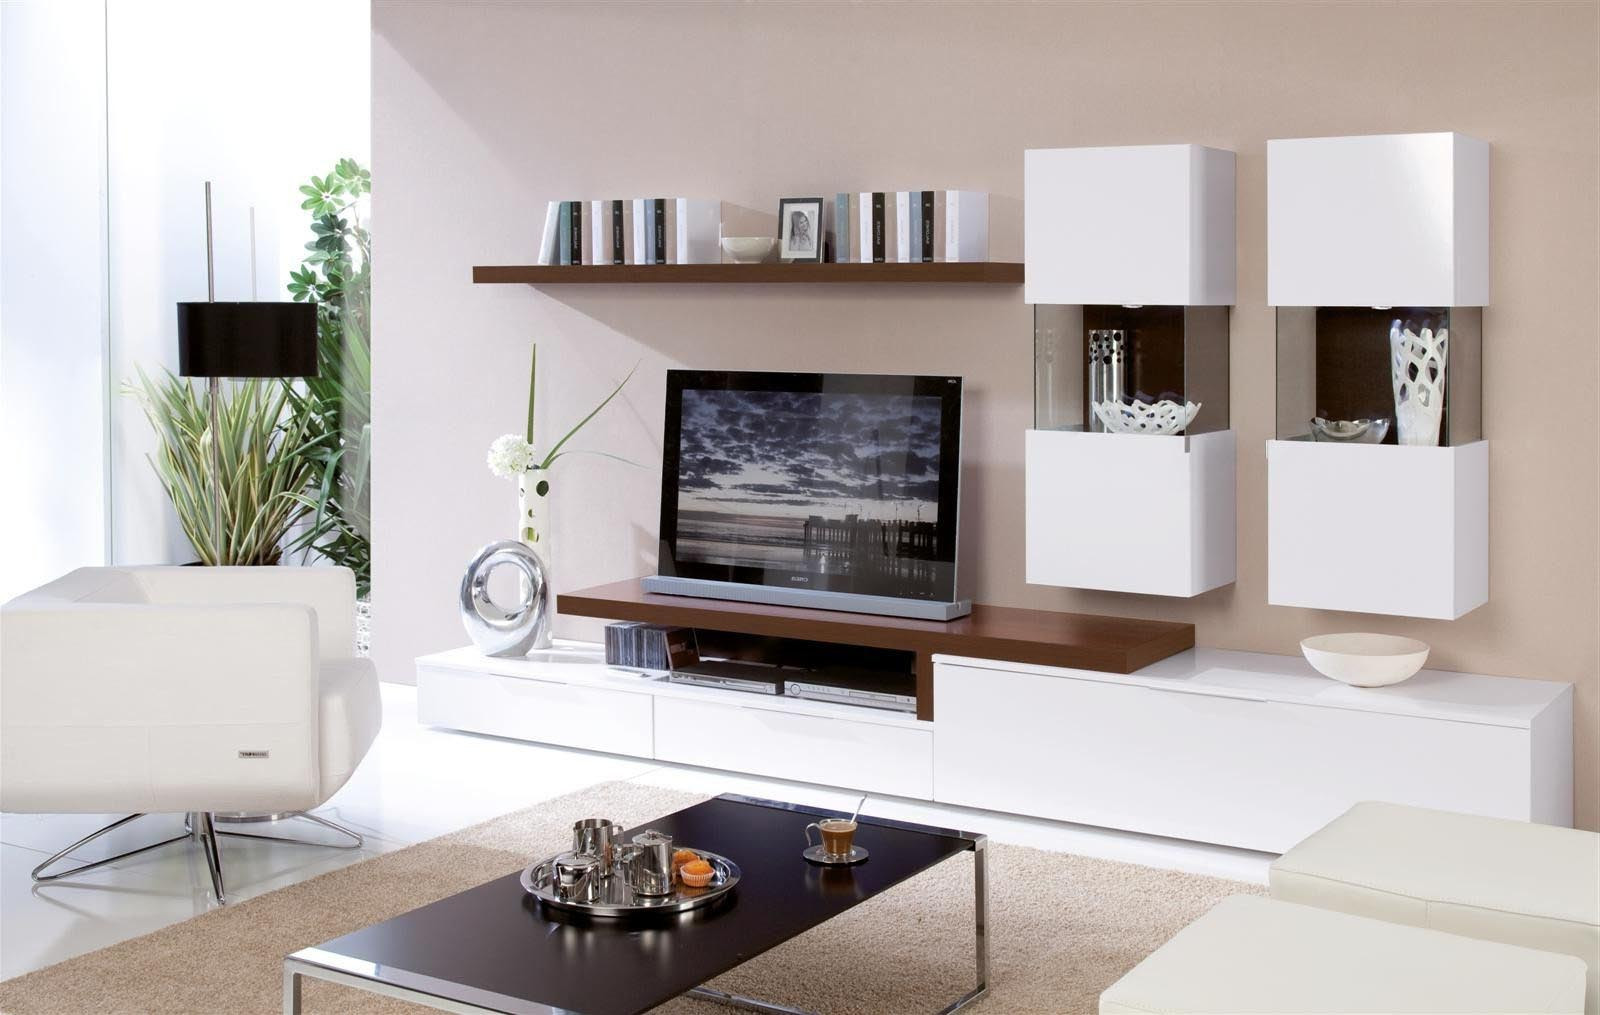 Modern Wall Shelves Living Room
 Decorating Wall Mounted and Floating Shelves in Your House